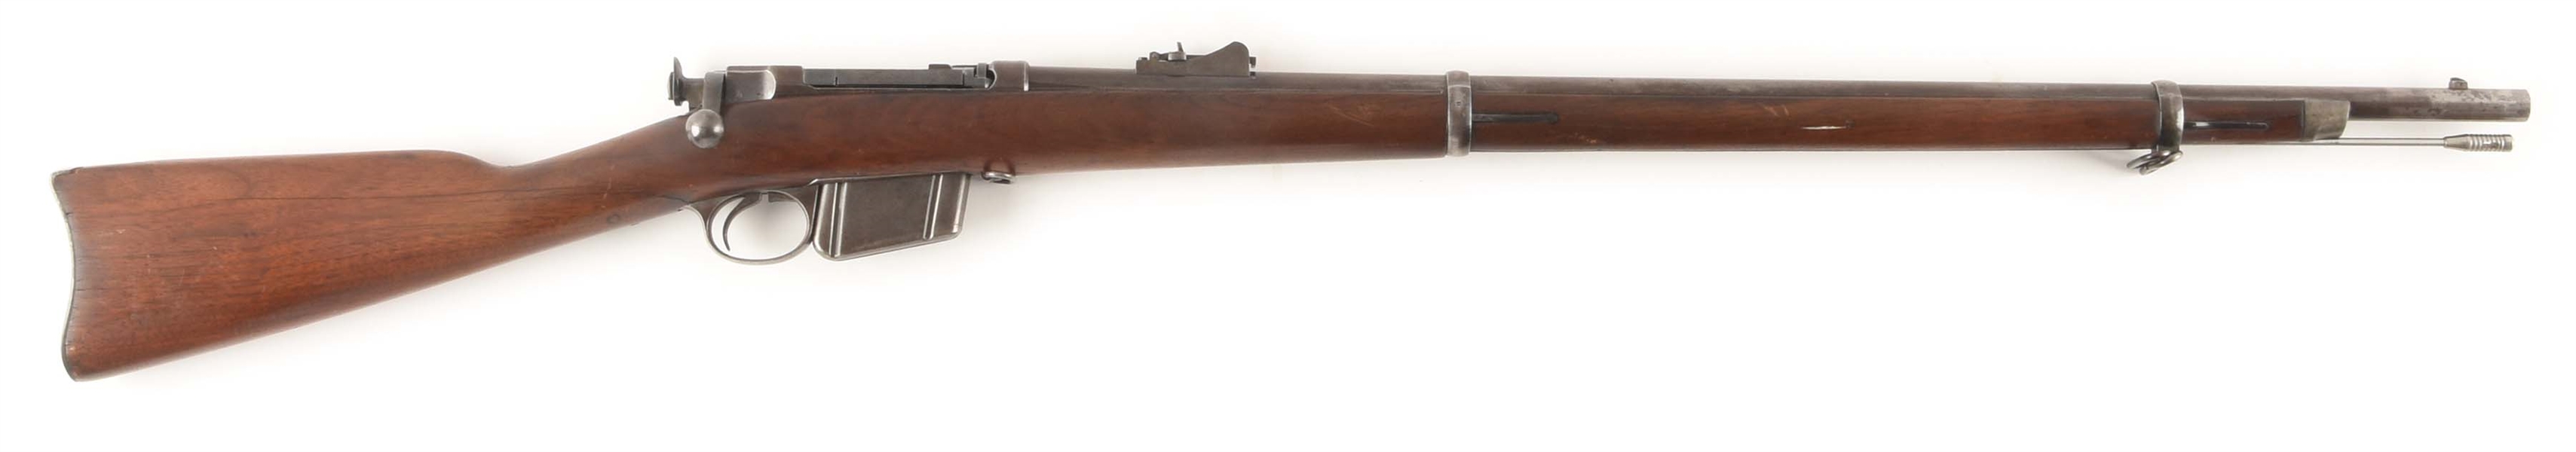 (A) NAVY CONTRACT REMINGTON-LEE 1885 BOLT-ACTION RIFLE.